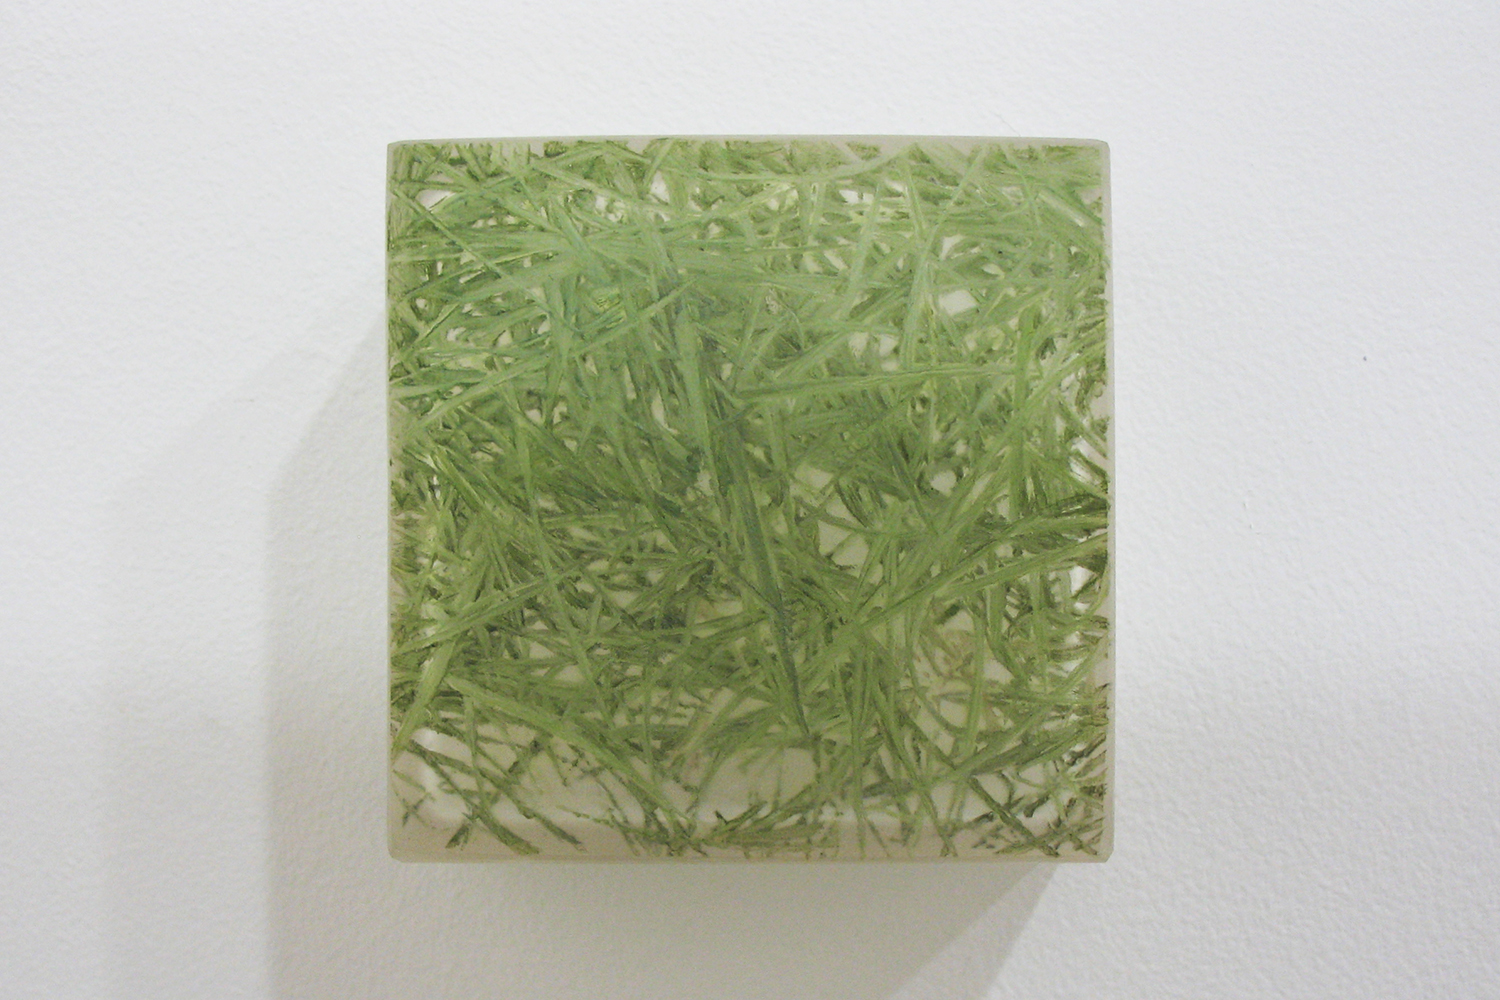 Photo-painting 草上のかおり｜Scent on the grass ｜7.5 x 7.5 x 3 cm｜Oil on FRP, mixed media｜ 2009